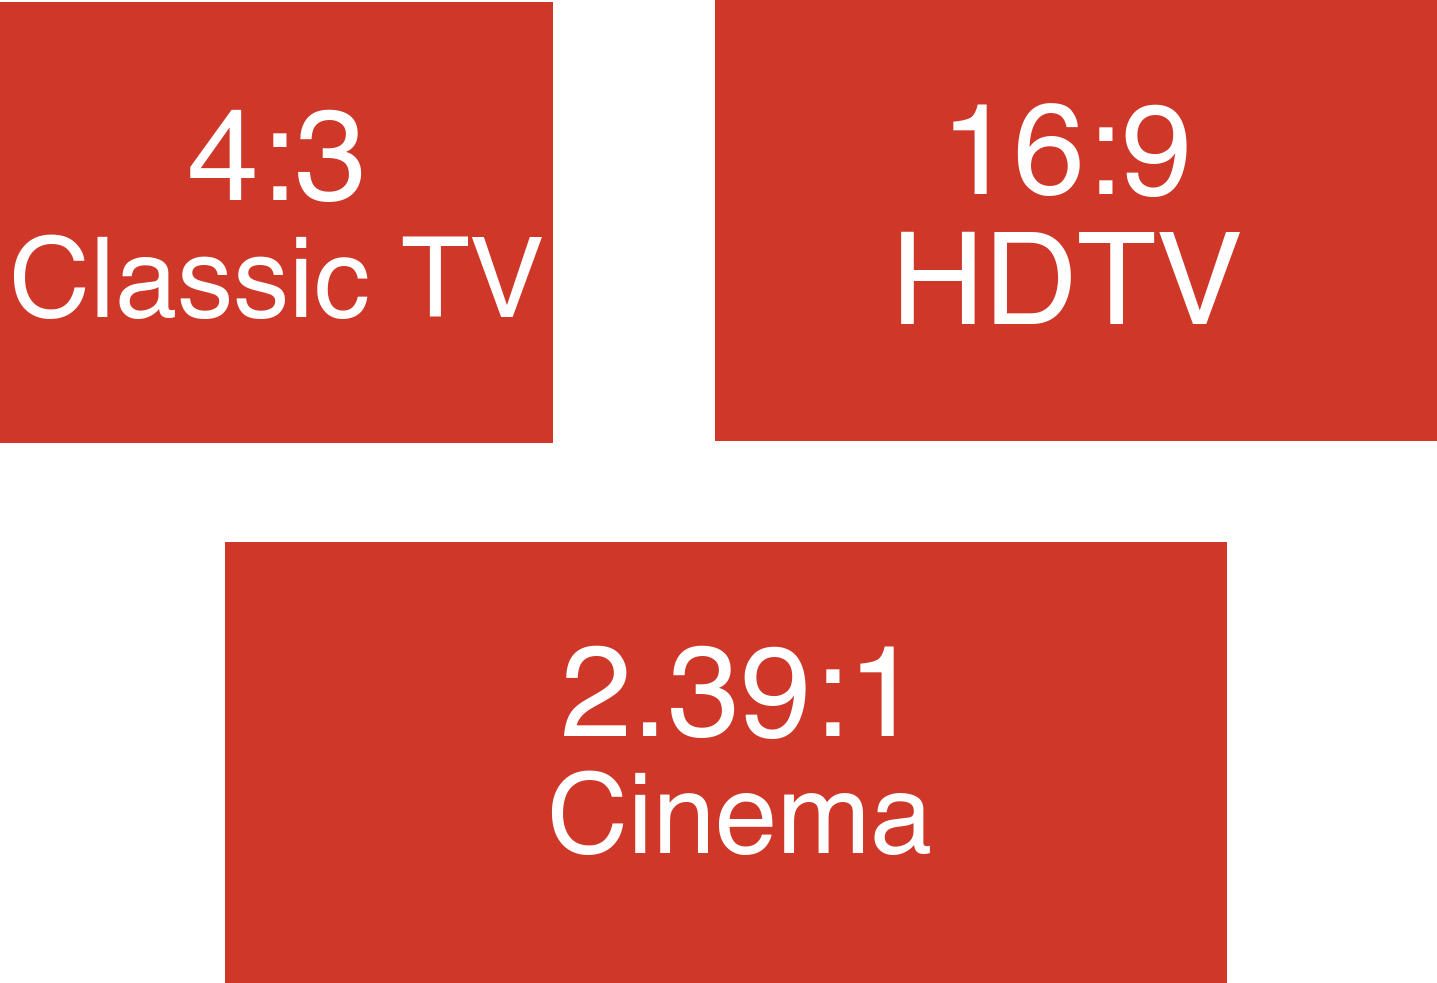 The most common video aspect ratios for TV and video are 4:3, 16:9, and 2.39:1